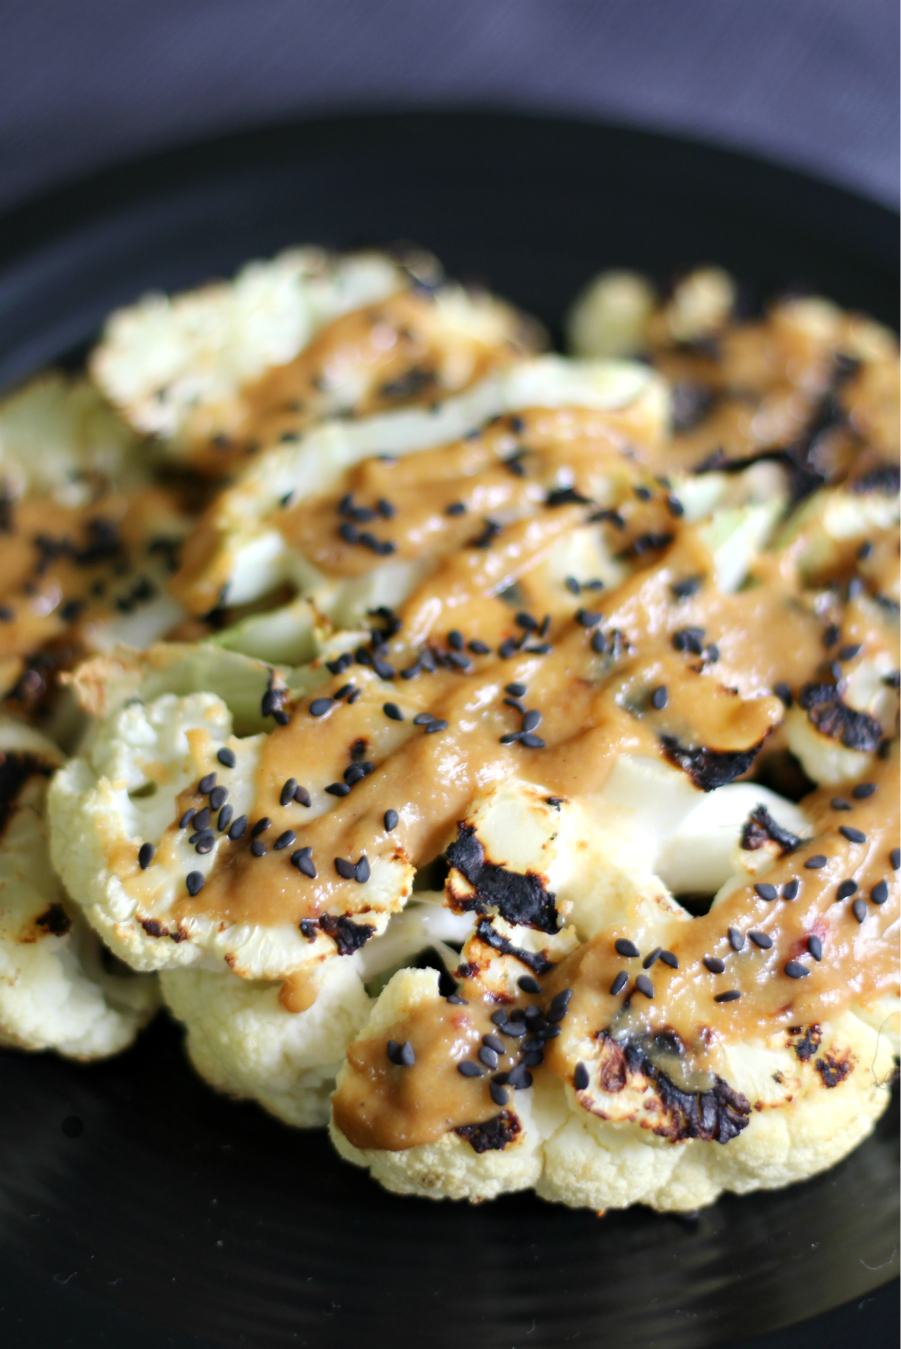 Grilled Ginger Cauliflower Steaks with Tahini Sauce | Strength and Sunshine @RebeccaGF666 Thick slices of cauliflower, rubbed with spices and grilled to tender perfection. Served with a slightly spicy tahini sauce, these grilled ginger cauliflower steaks need to hit your grill stat! Gluten-free, vegan, paleo, Whole 30, and nut-free! A healthy dinner recipe!